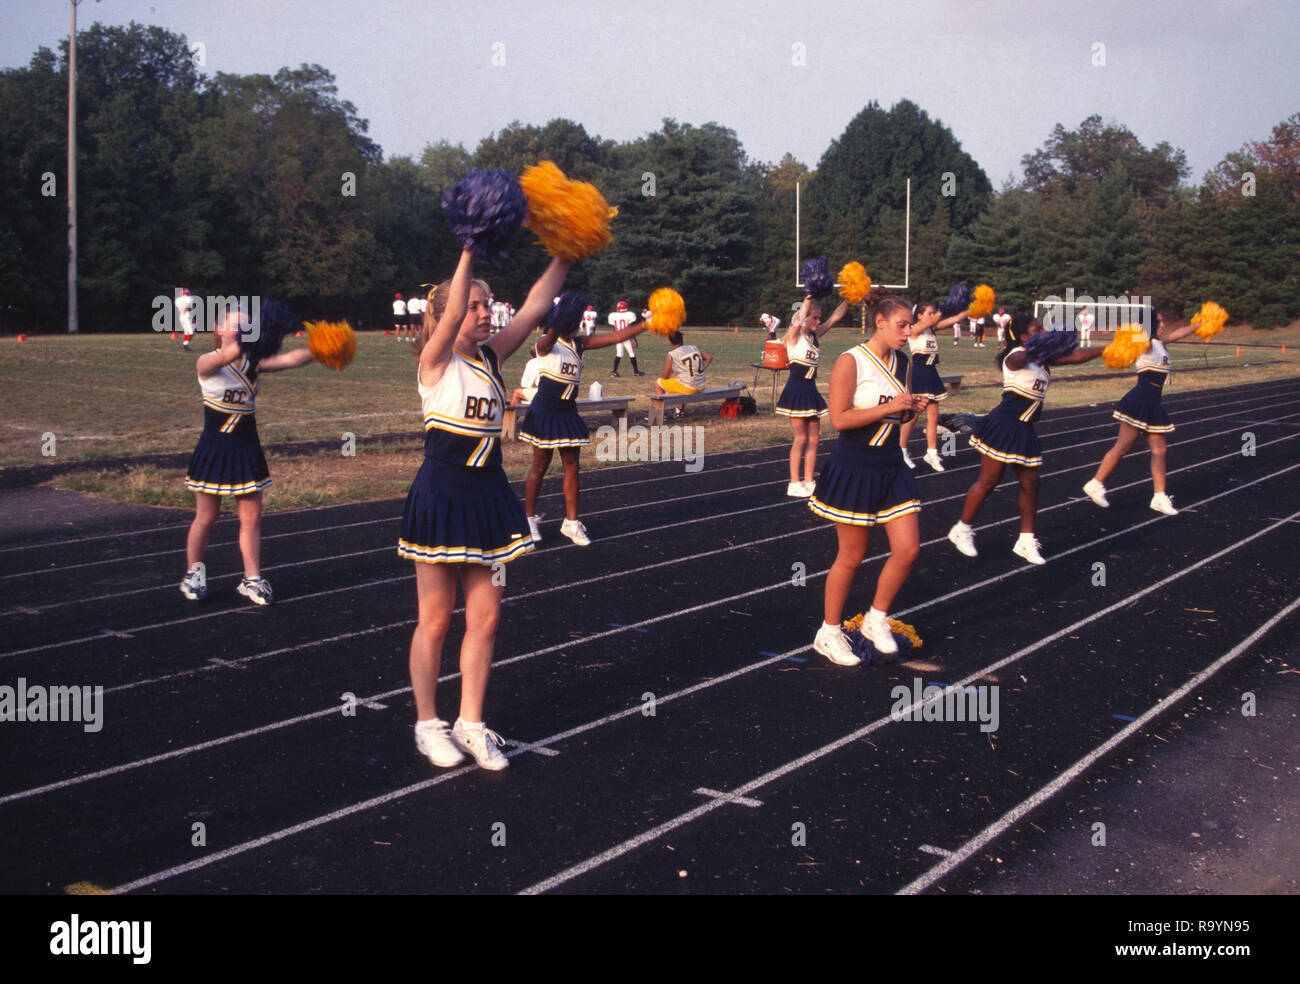 cheerleaders performing during halftime show at high school footbsll gsme Stock Photo